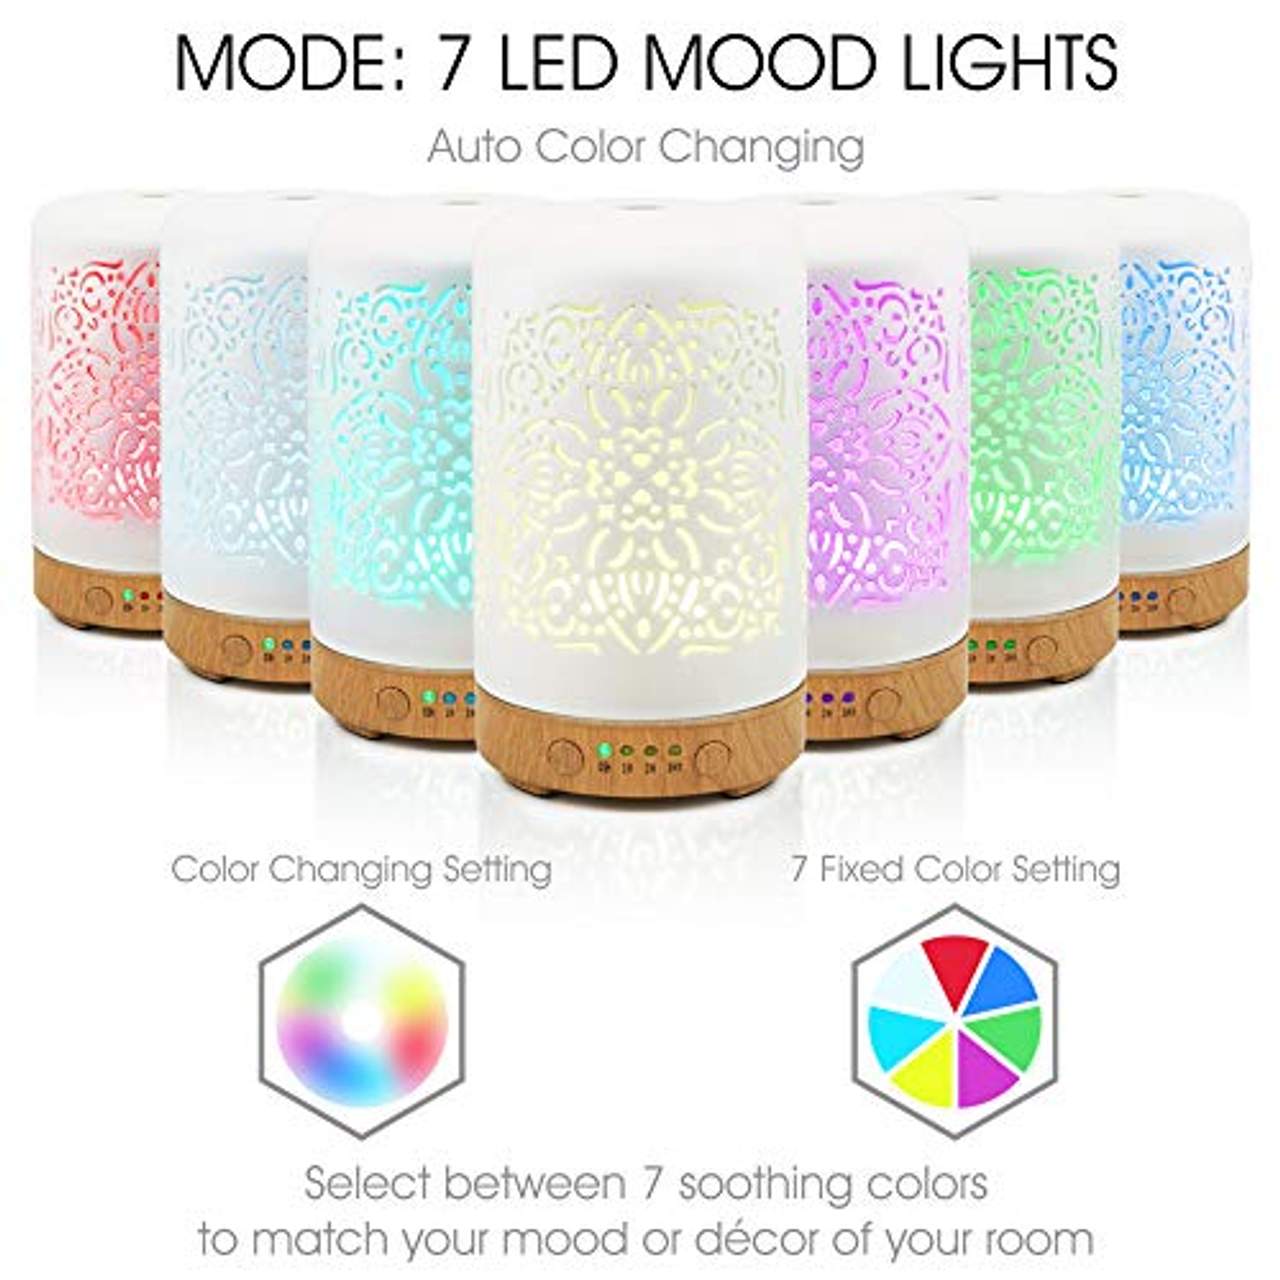 Earnest Living Aroma Diffuser